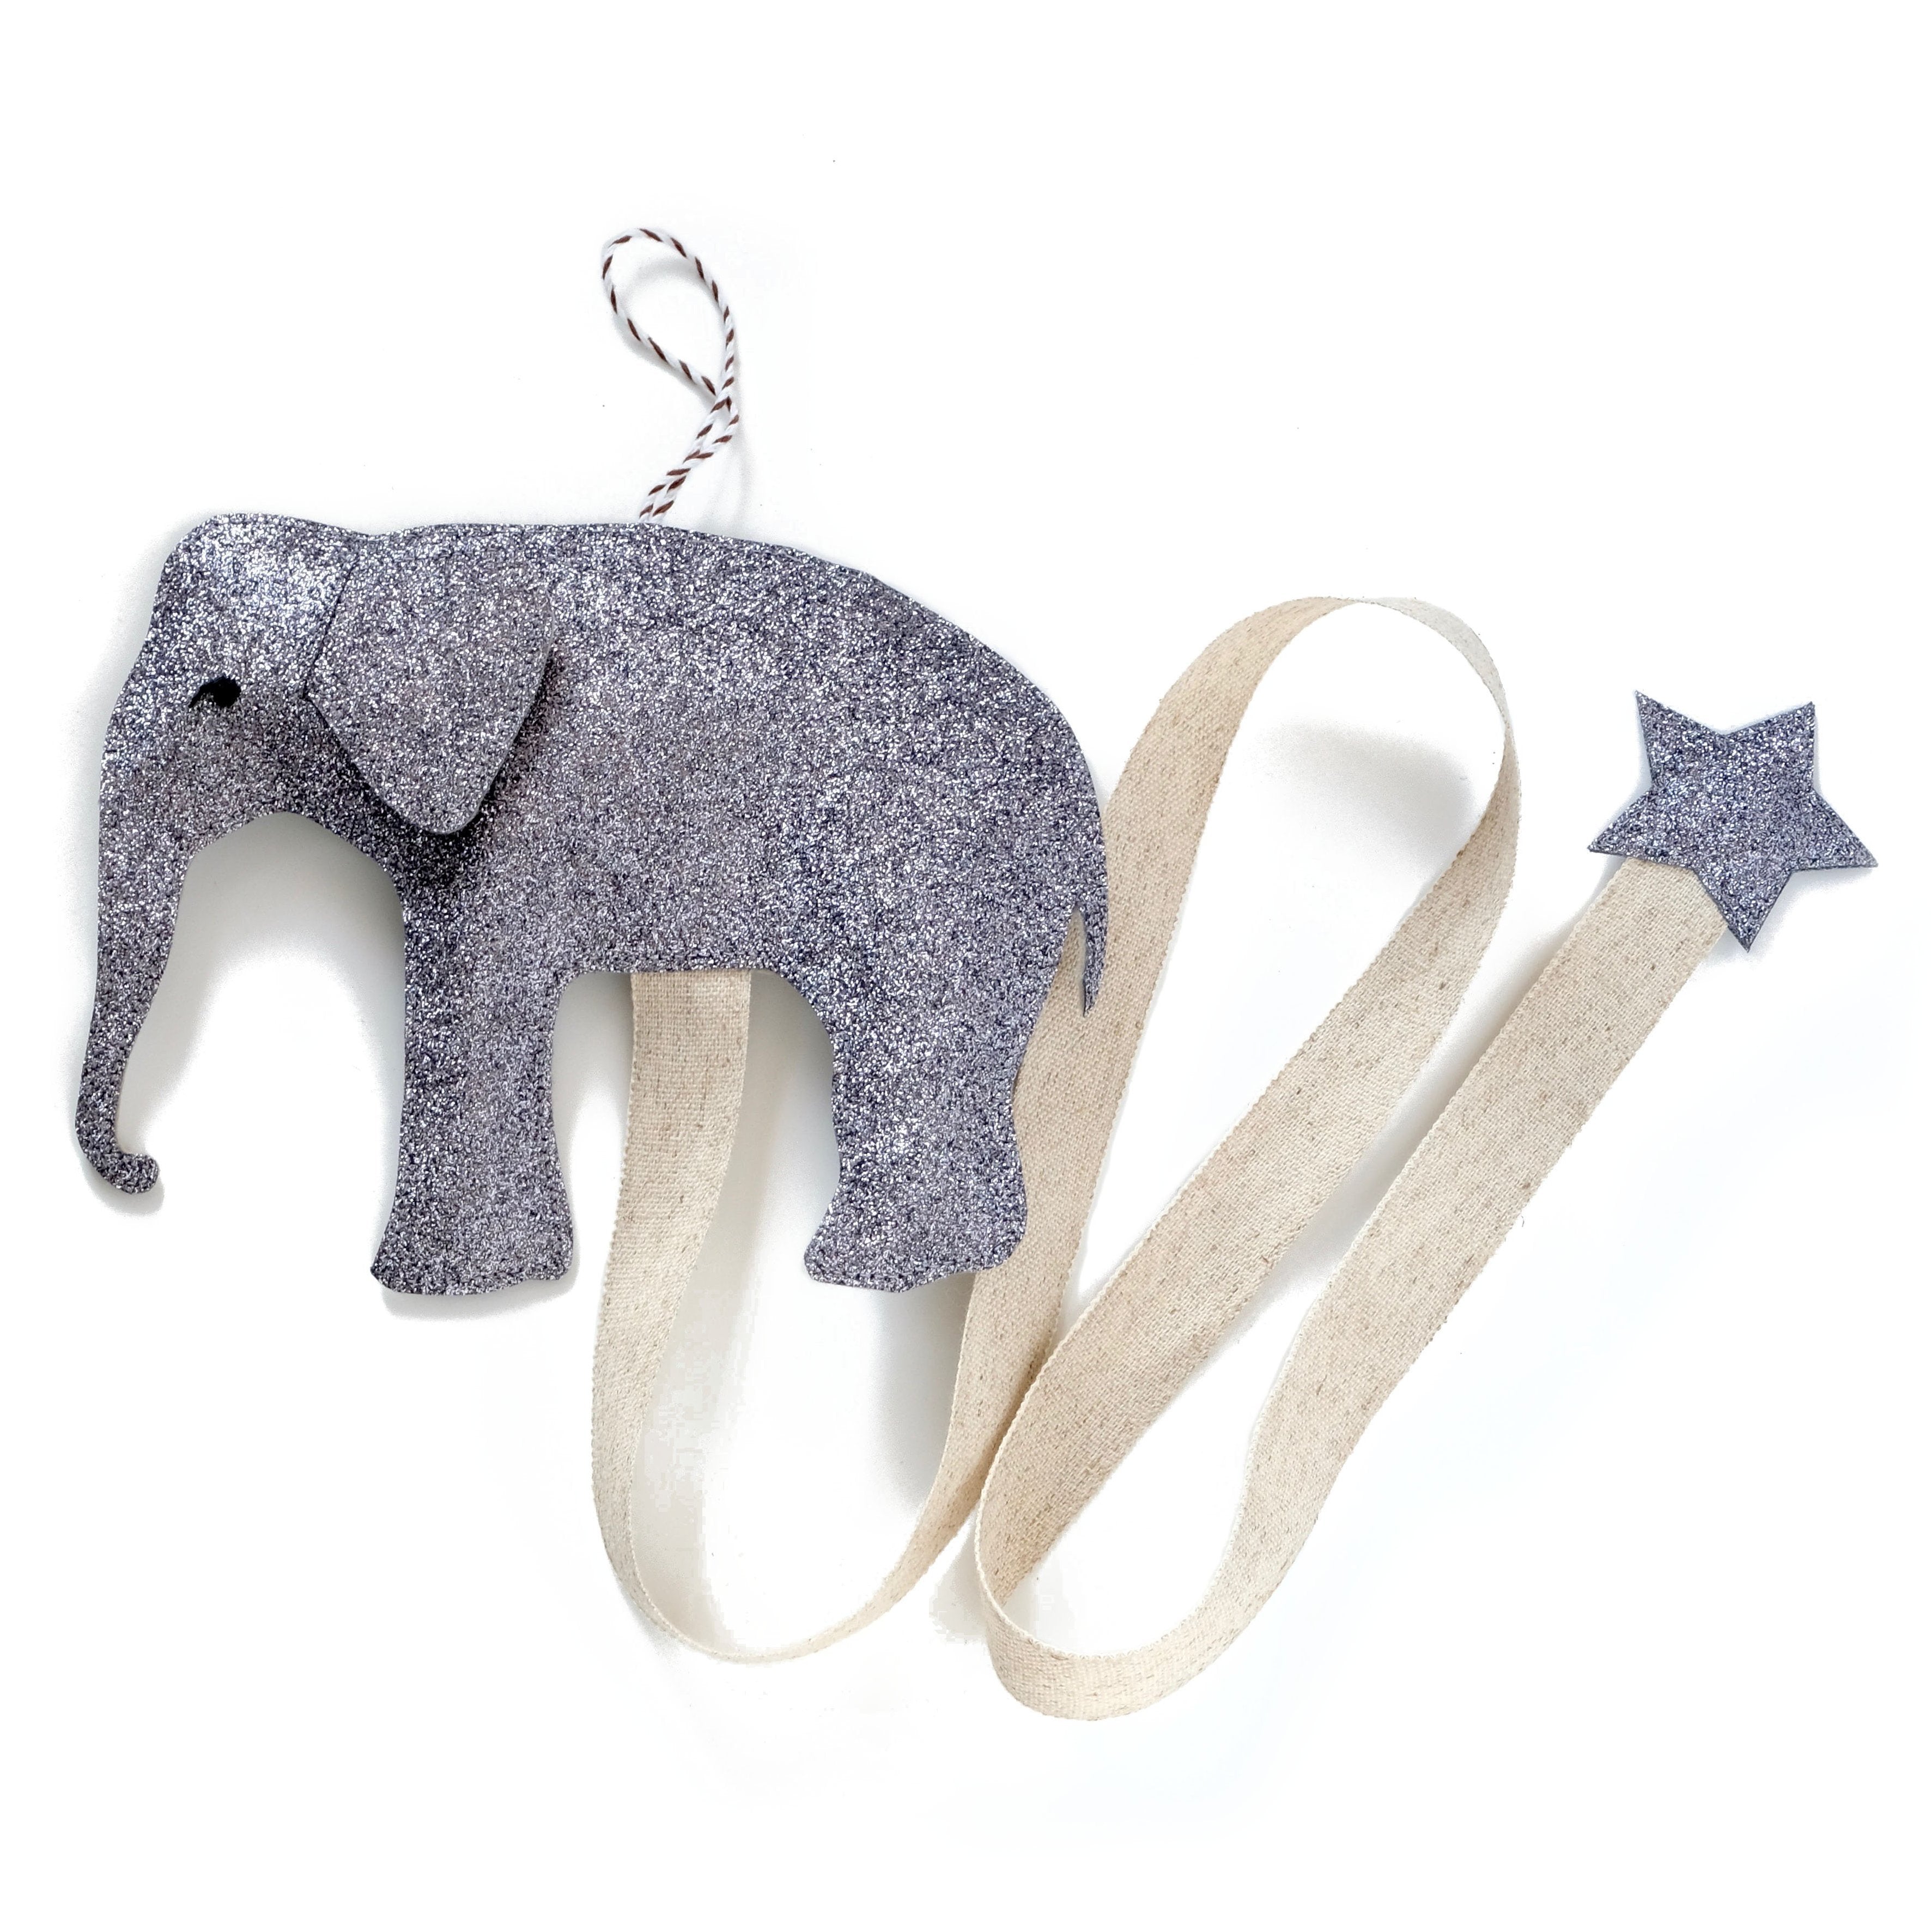 A children's room decoration on like any other, a wall mountable hair clip holder in the shape of an elephant.  Available in dark grey, silver or gold.